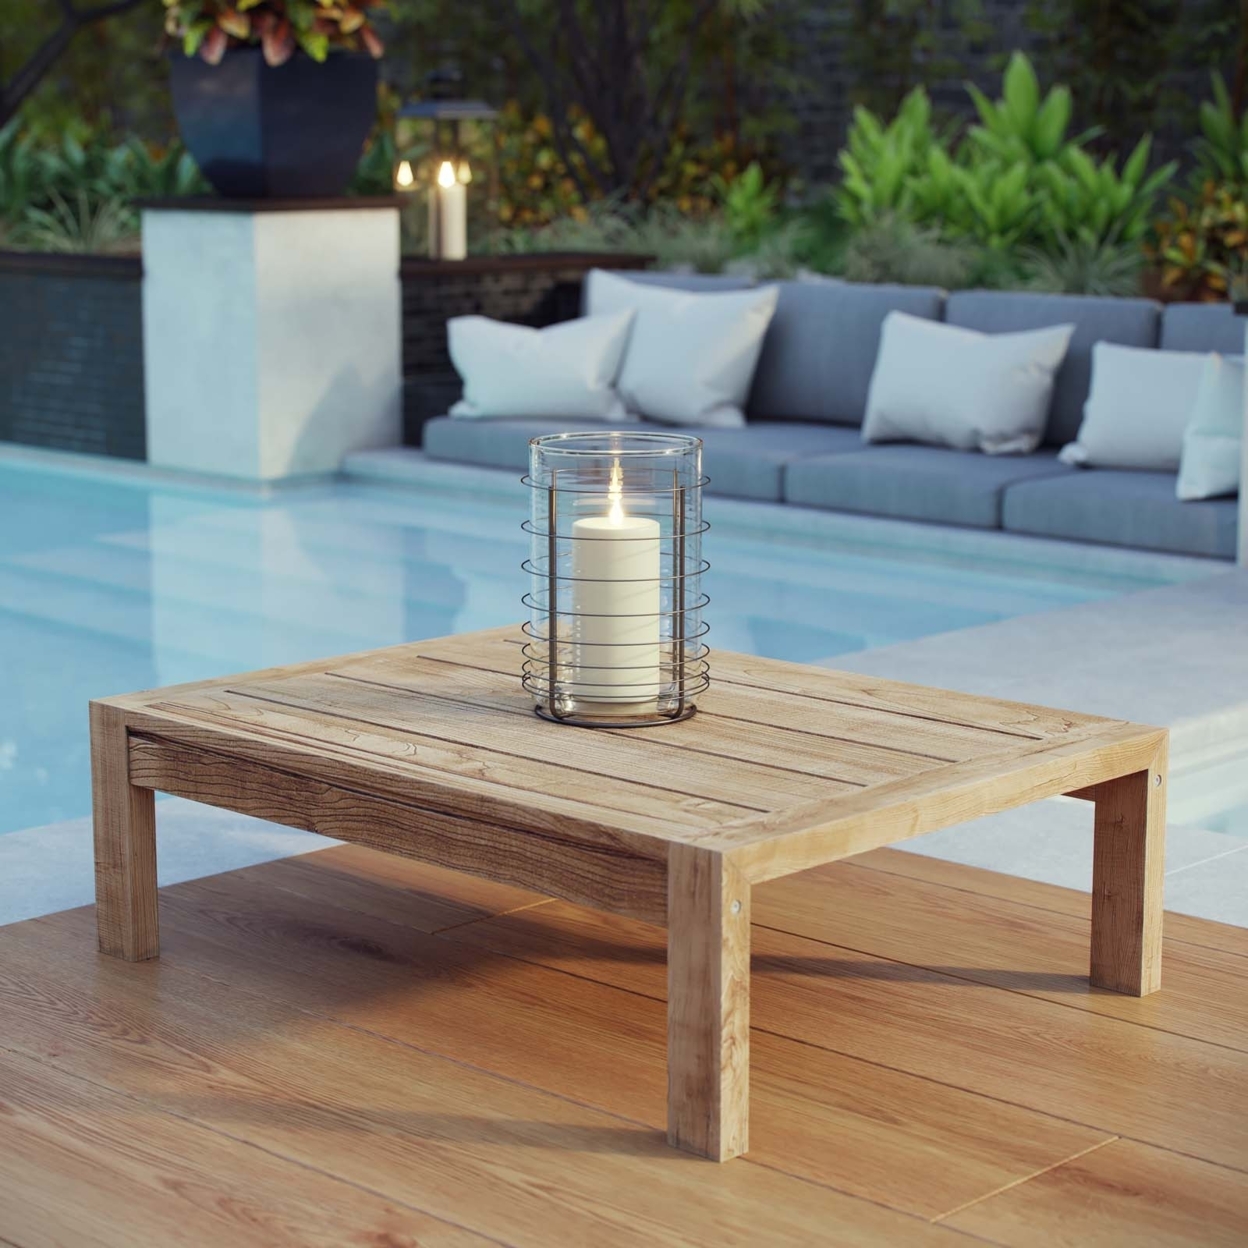 Modway Upland Outdoor Patio Wood Coffee Table in Natural - image 4 of 4